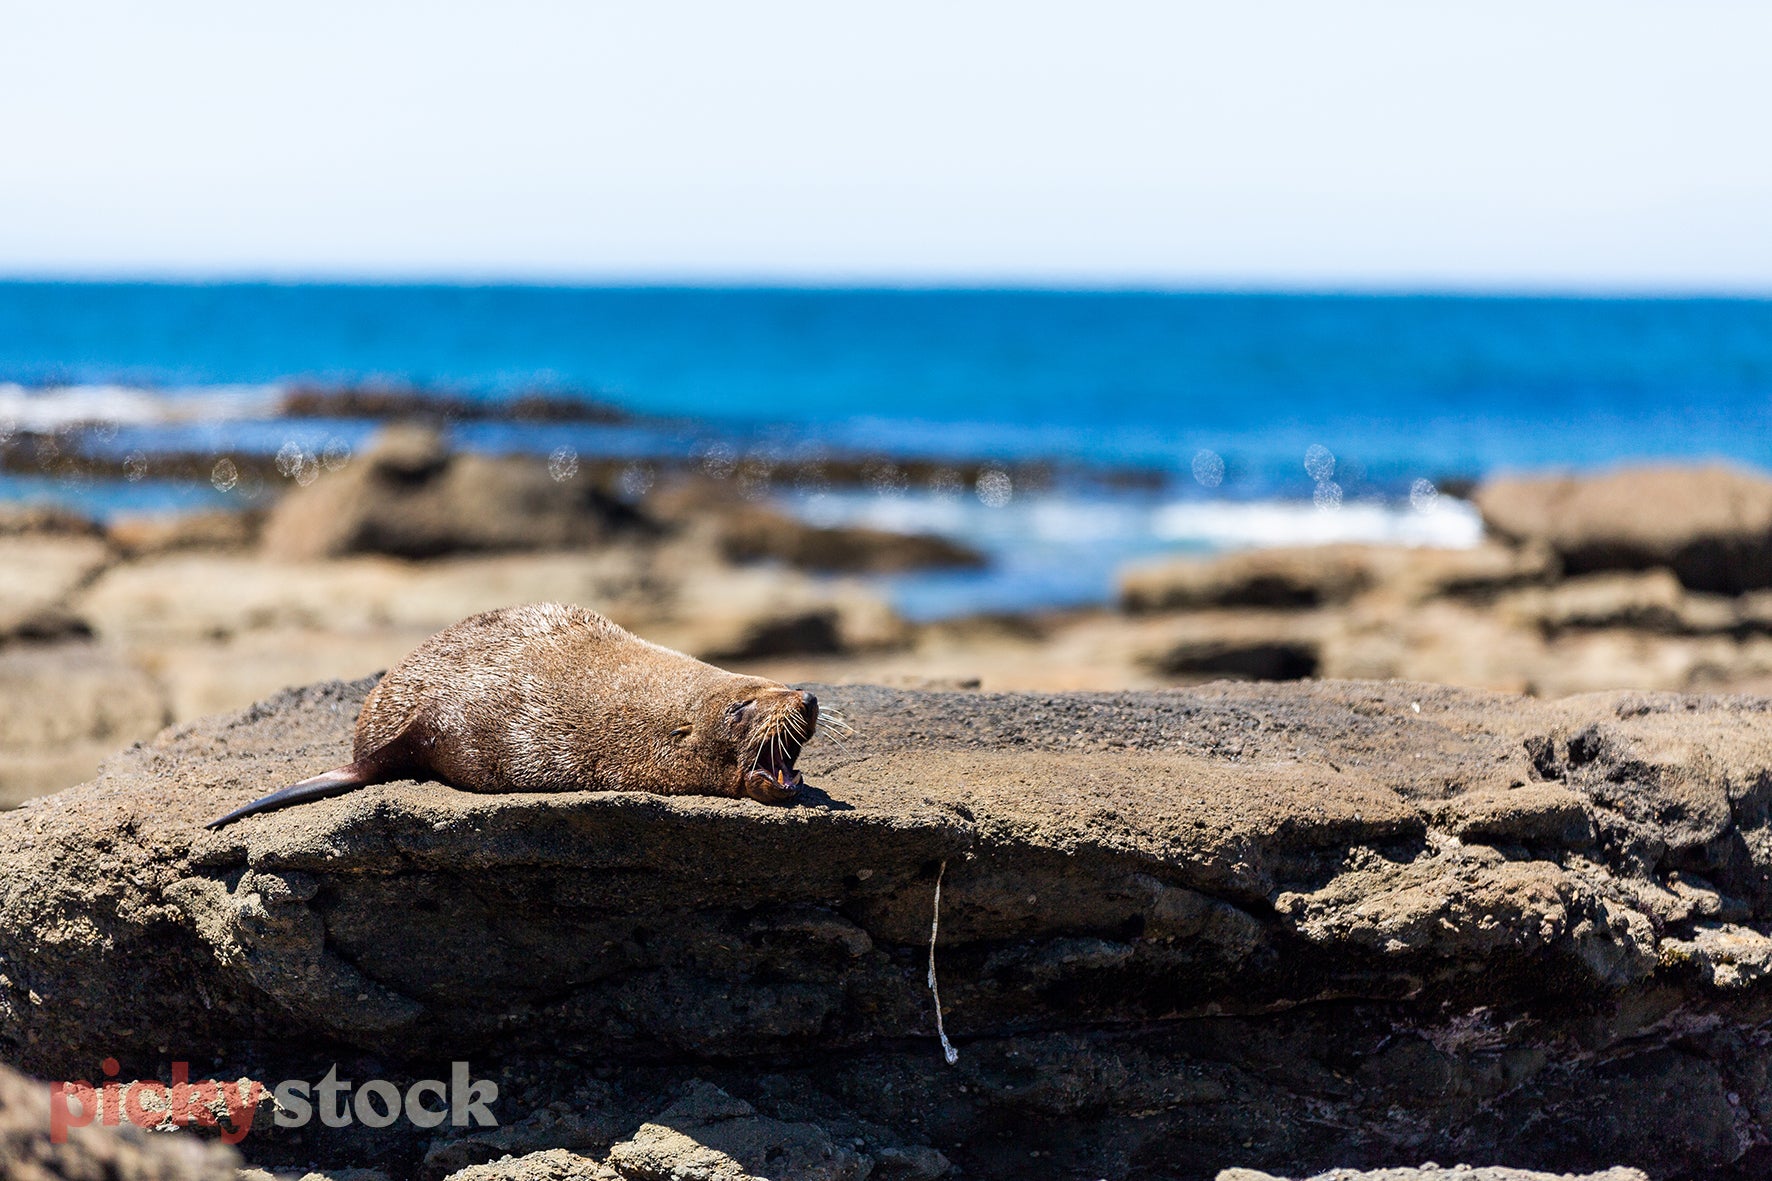 A seal yawns as it sunbathes on a rock. Blue ocean in background with white sky. 